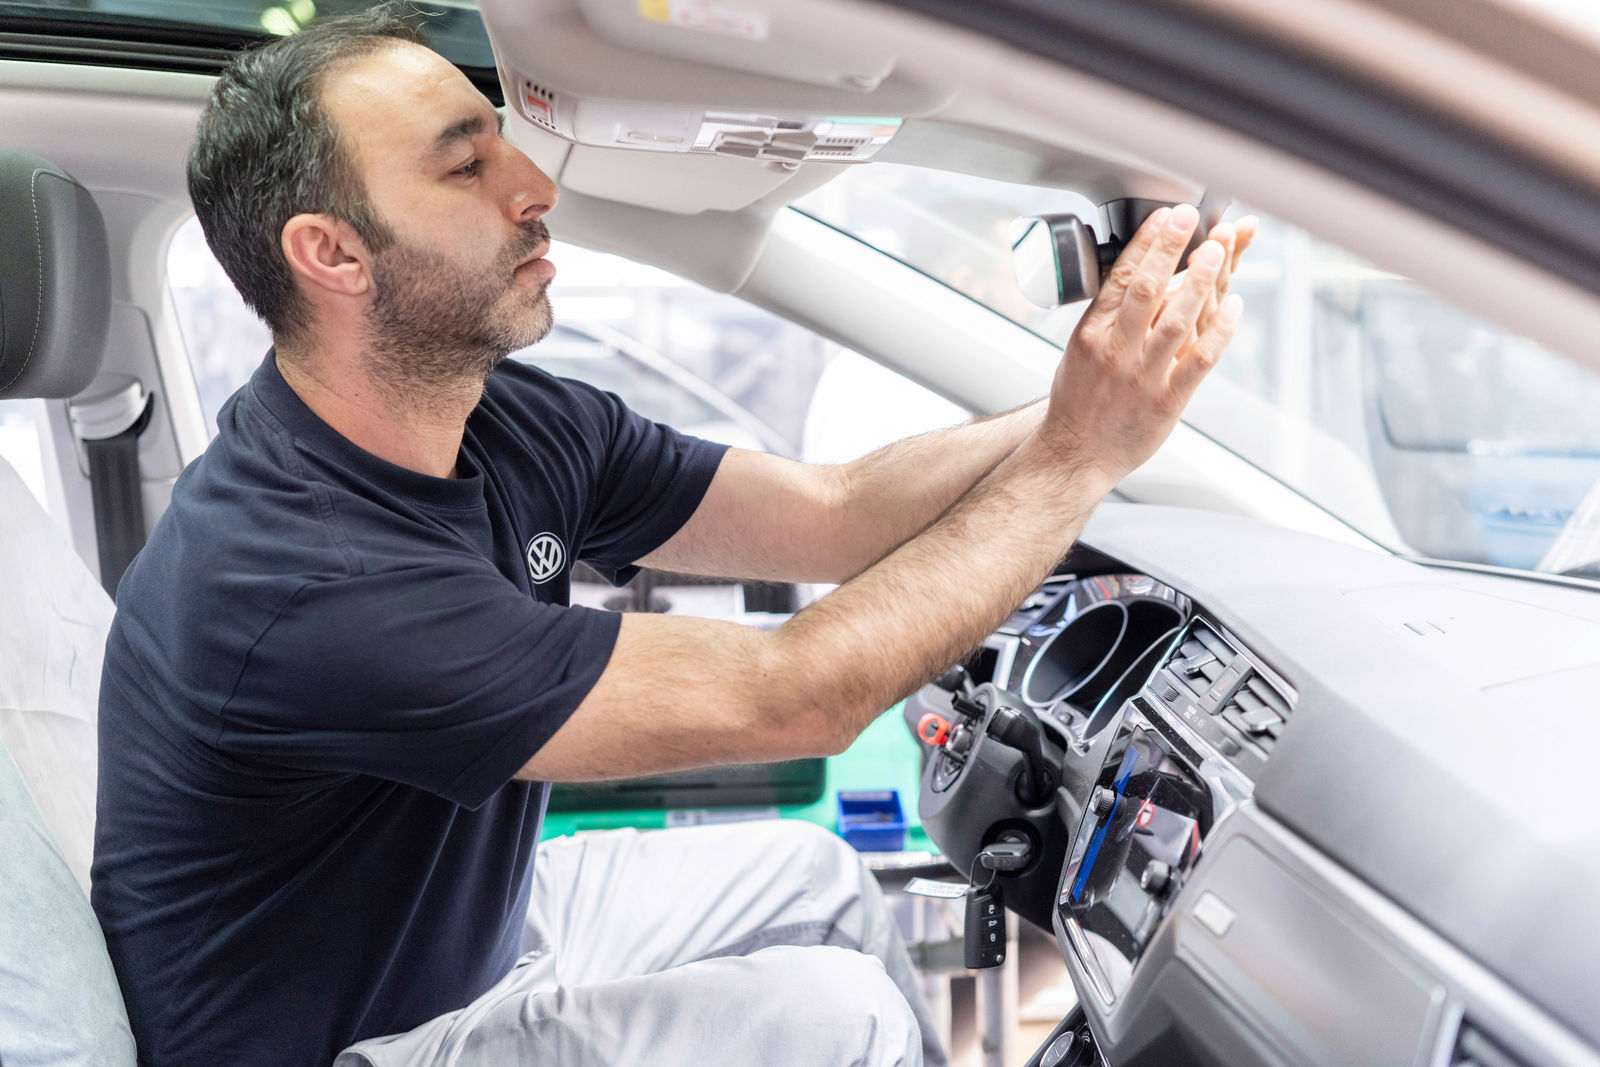 Assembly Wolfsburg plant: An employee installs the rearview mirror